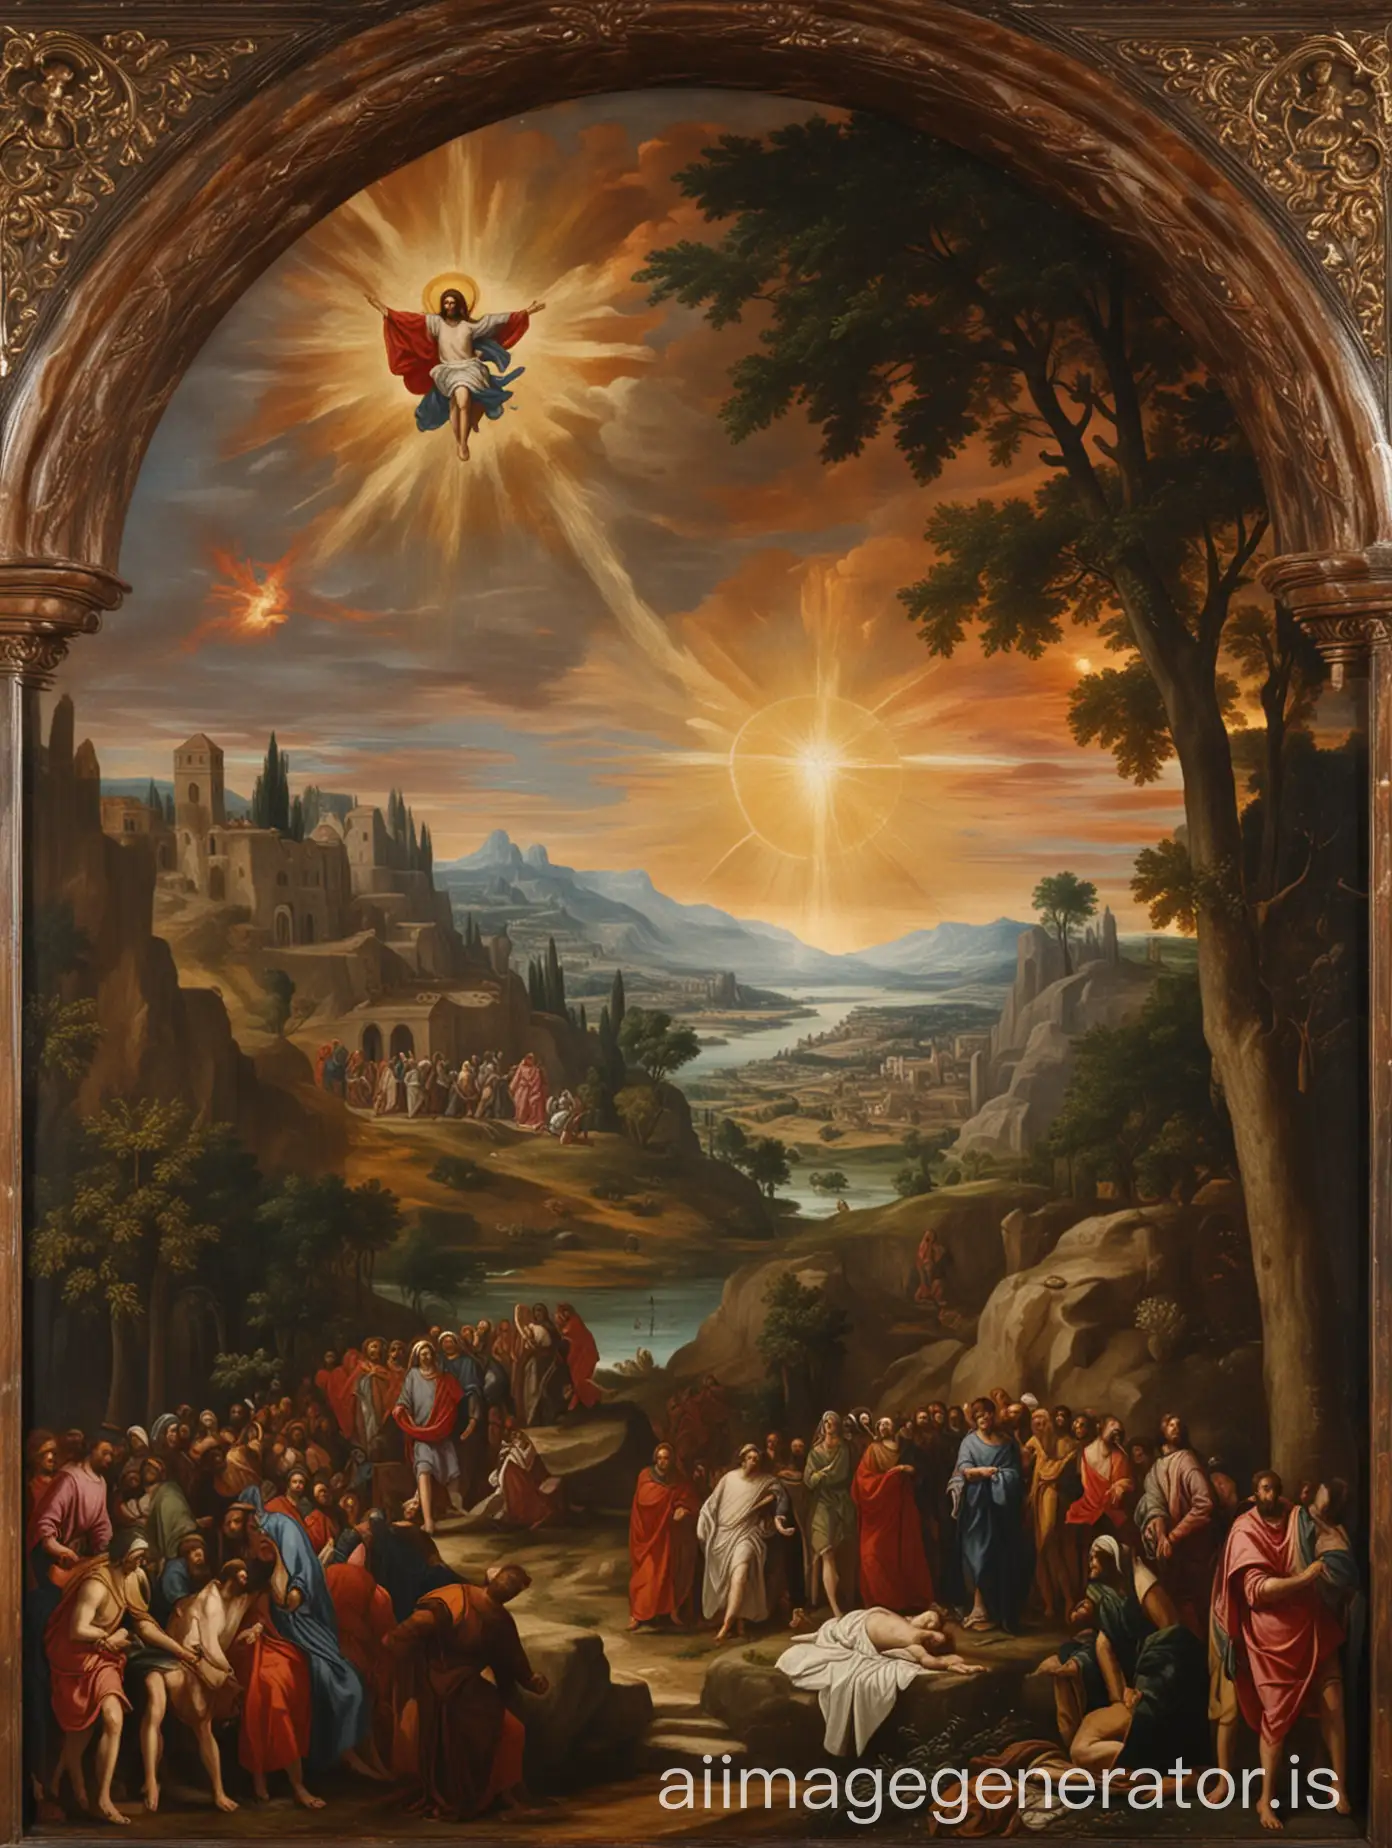 An oil painting in the style of Titian depicts the Resurrection of Christ. In the foreground, the empty tomb is visible, as well as the entourage of Christ. In the distance on the left side of the painting, one can see a Renaissance landscape with the silhouette of Jerusalem. The color scheme is typical of Titian.